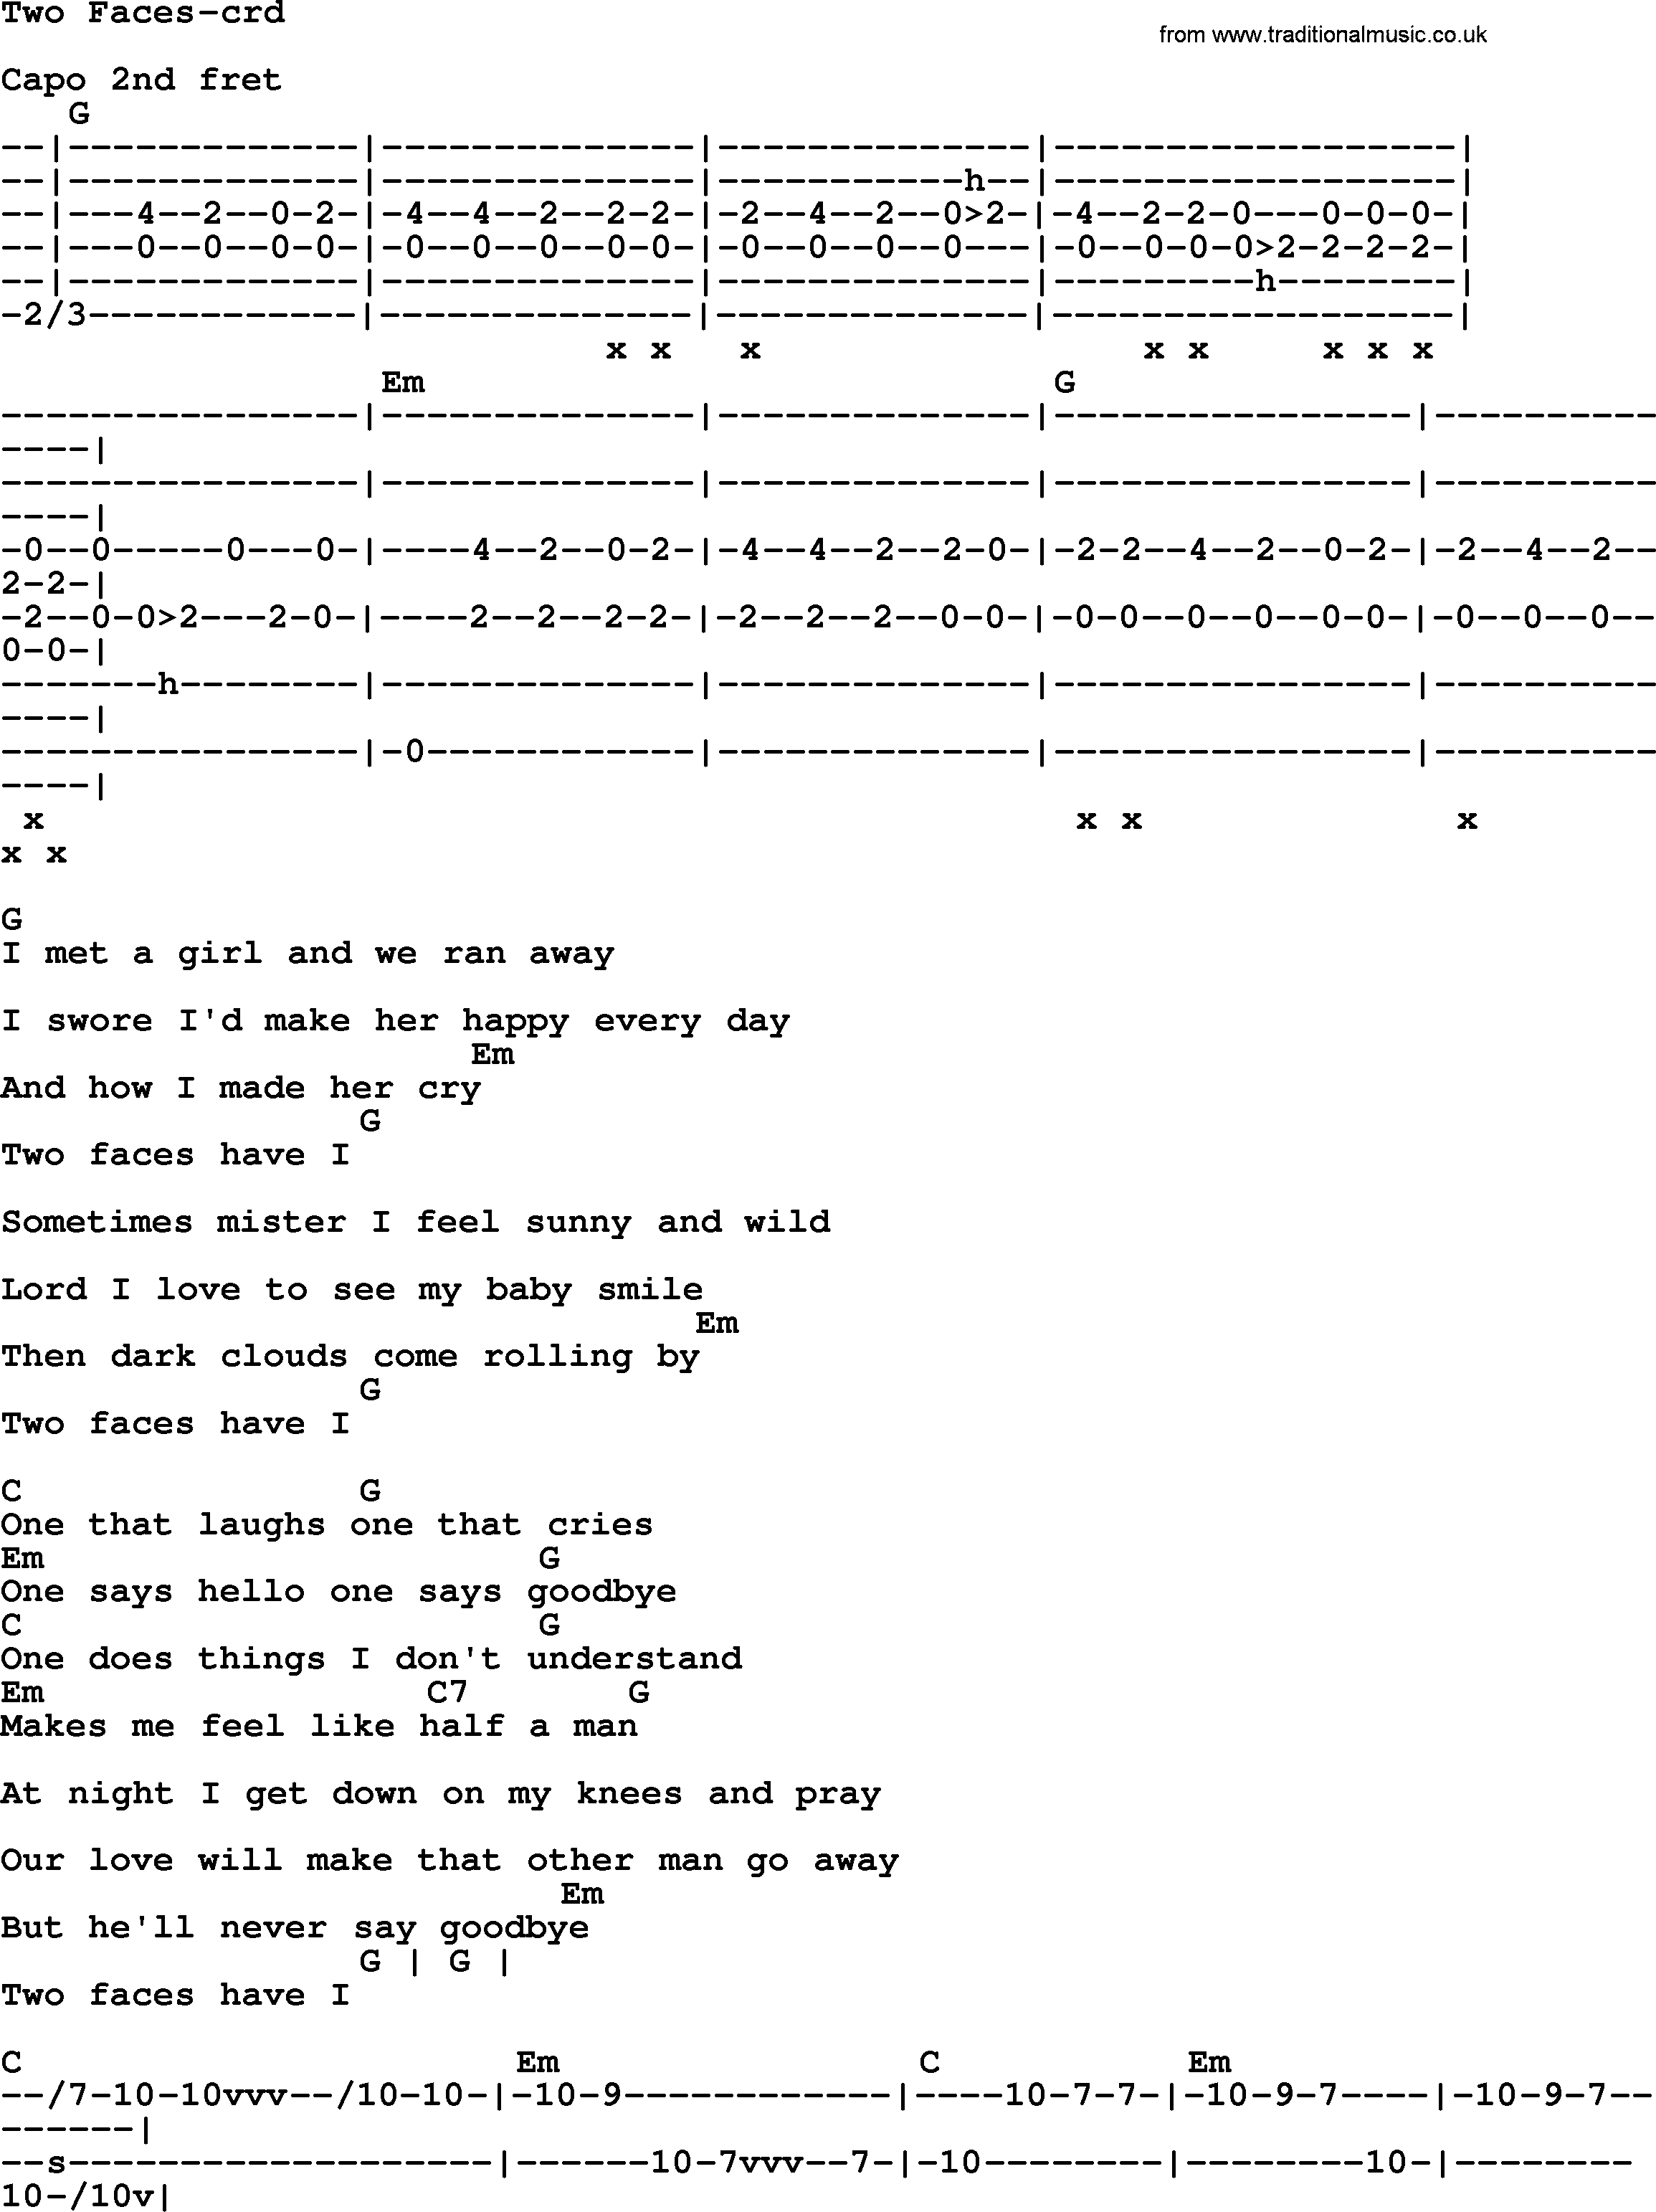 Bruce Springsteen song: Two Faces, lyrics and chords